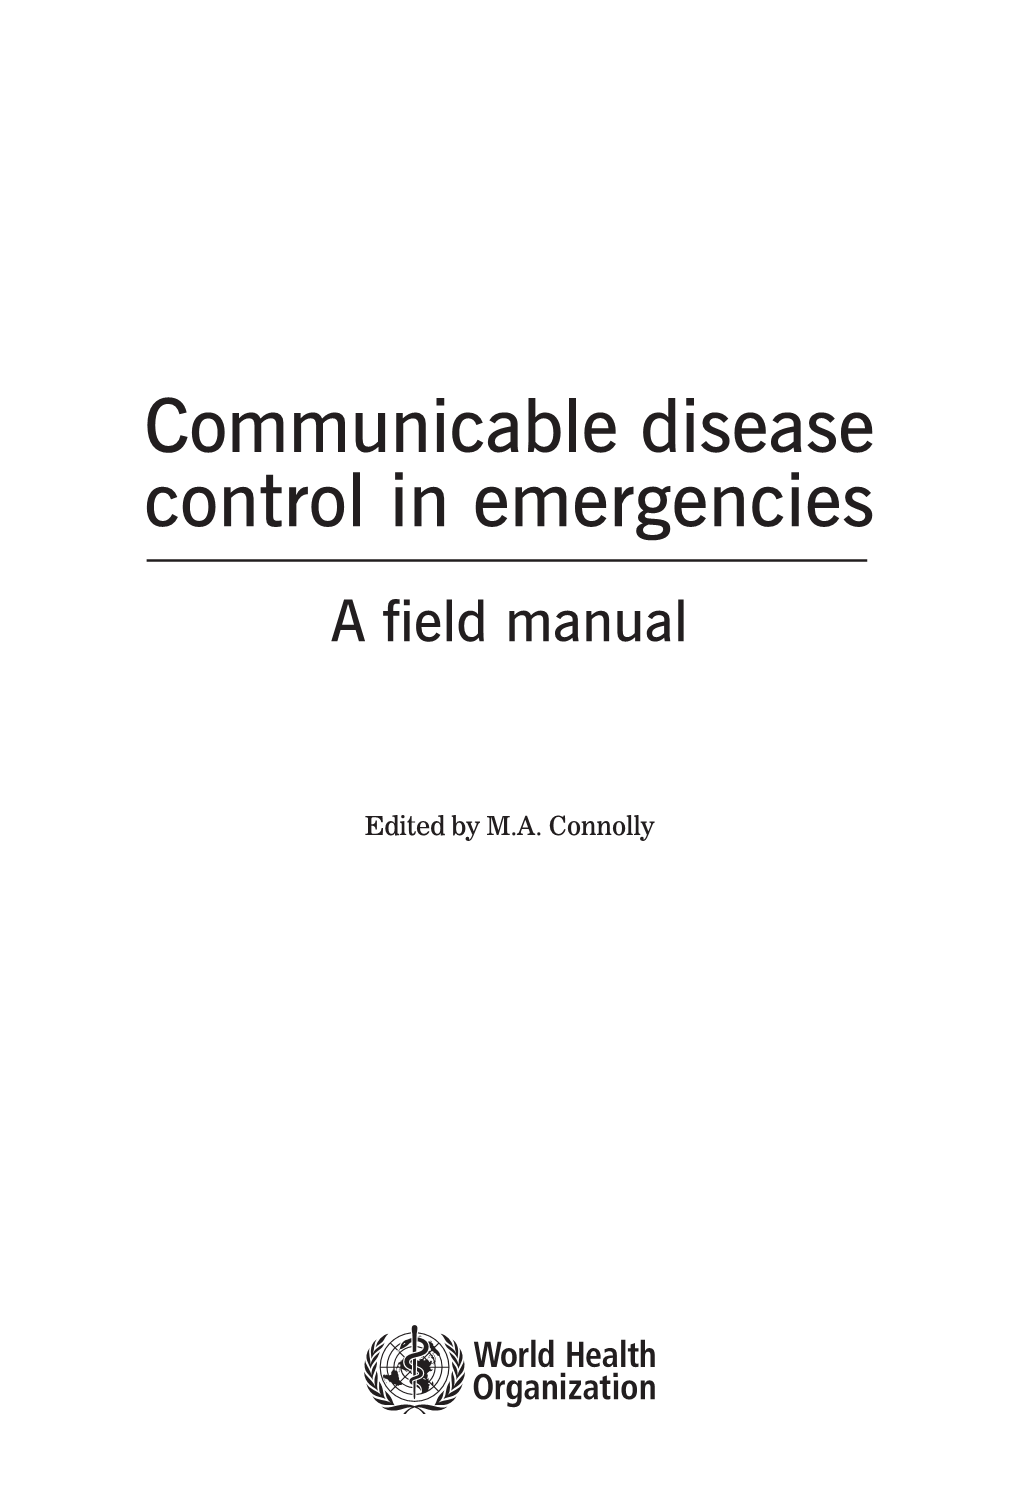 Communicable Disease Control in Emergencies: a Field Manual Edited by M